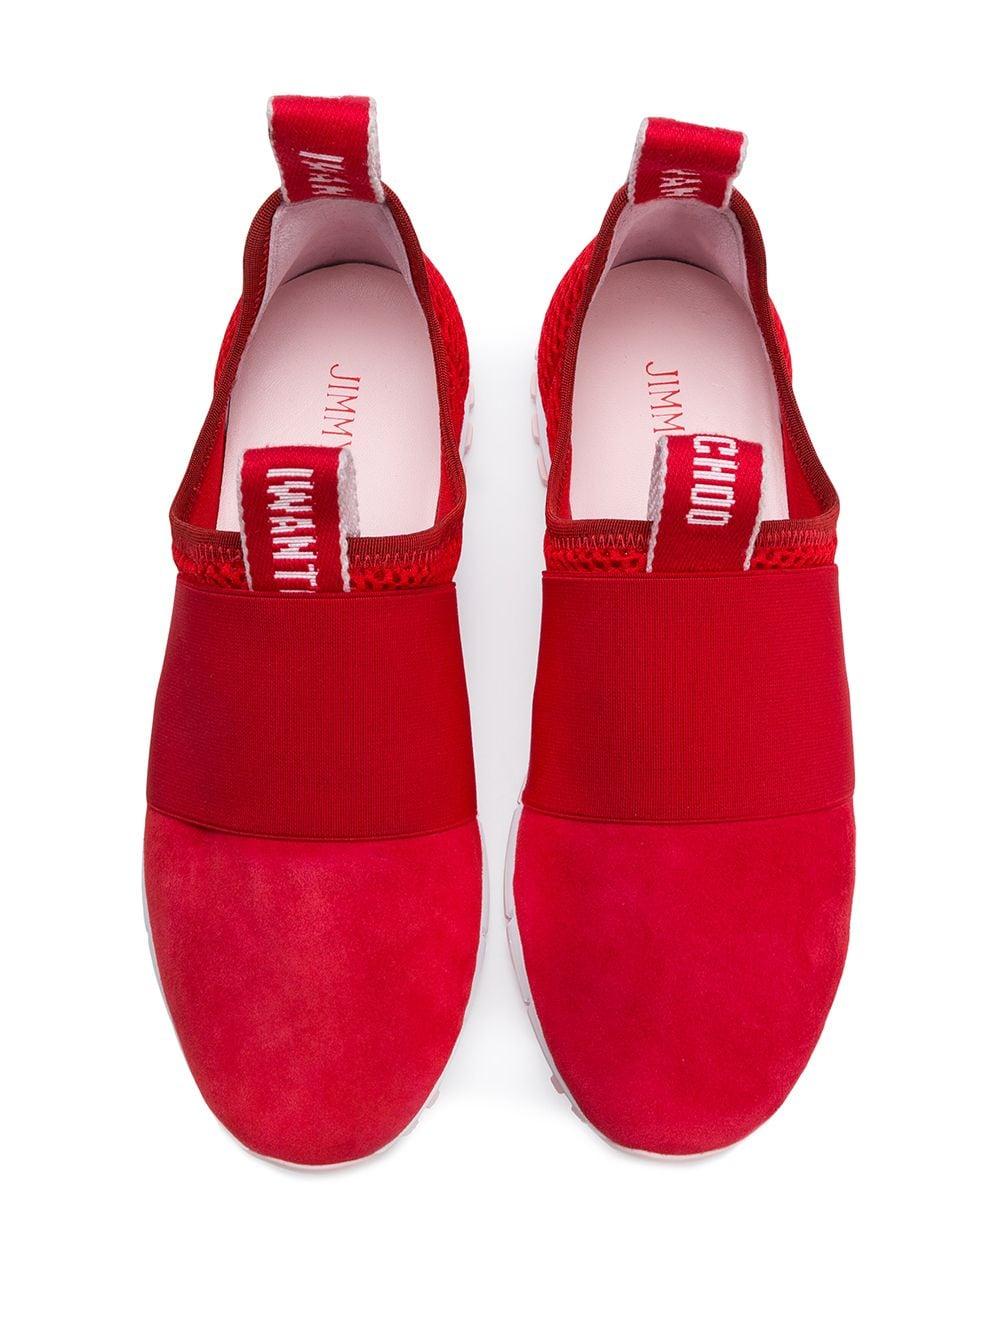 Jimmy Choo (red Bottom Tennis Shoes ) $235 for Sale in Hialeah Gardens, FL  - OfferUp